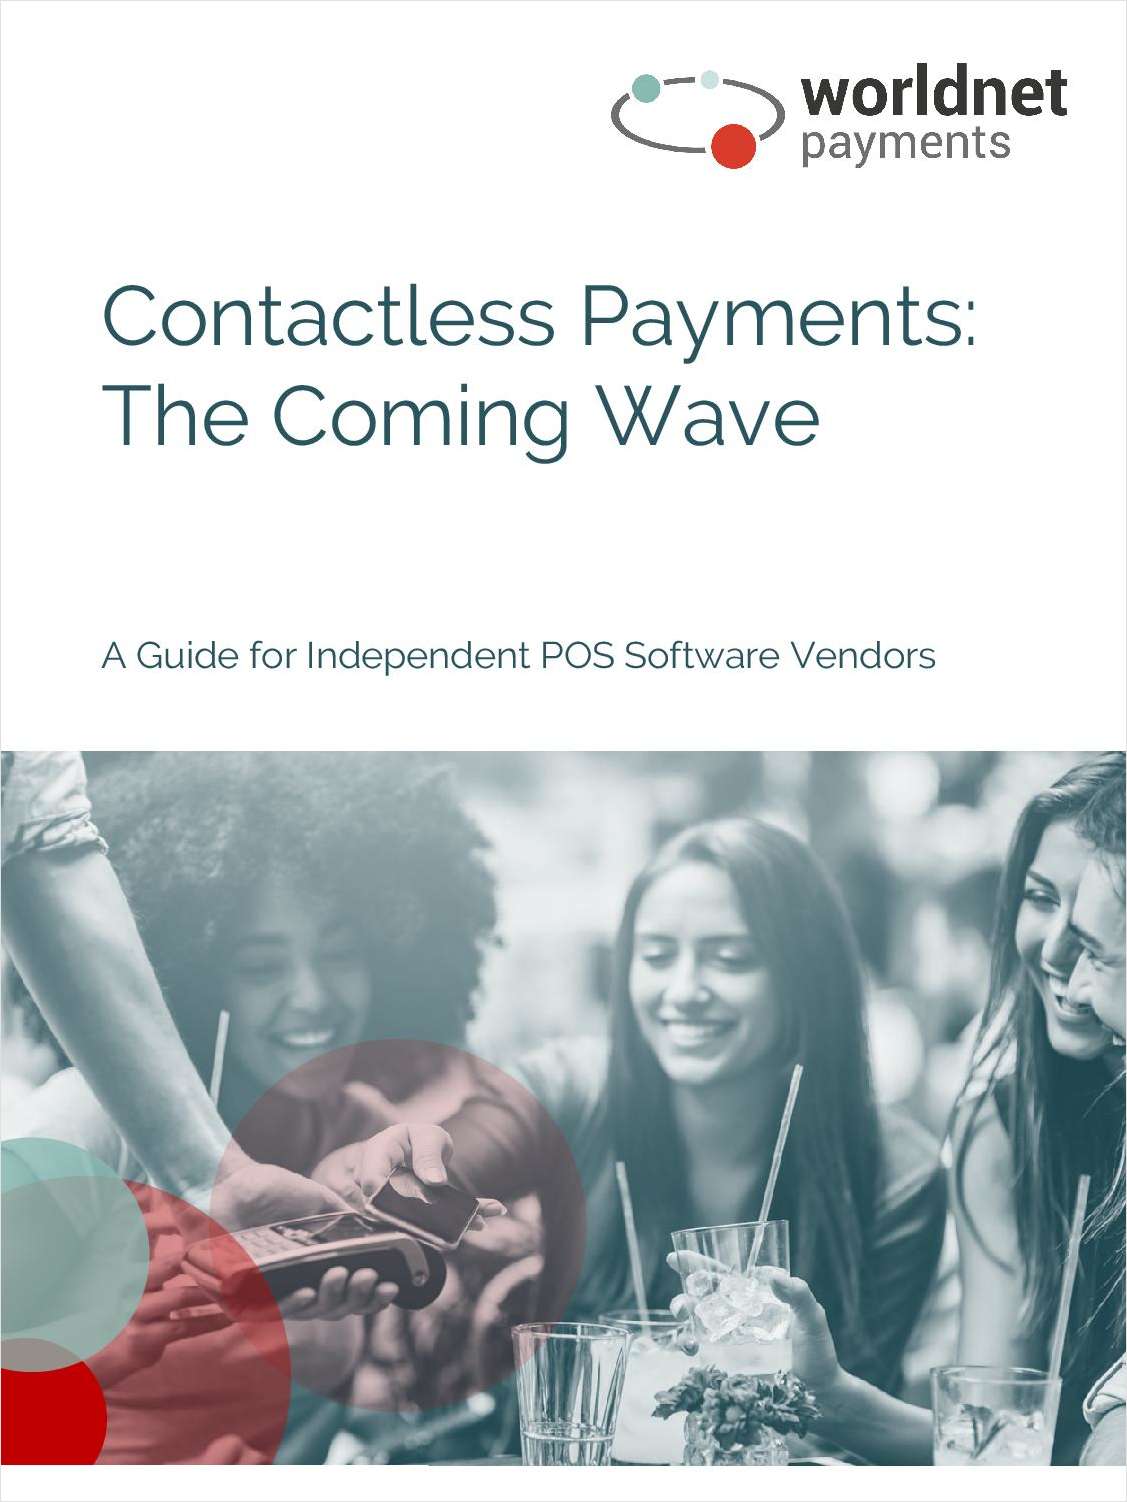 Is Your POS Software Ready for Contactless?